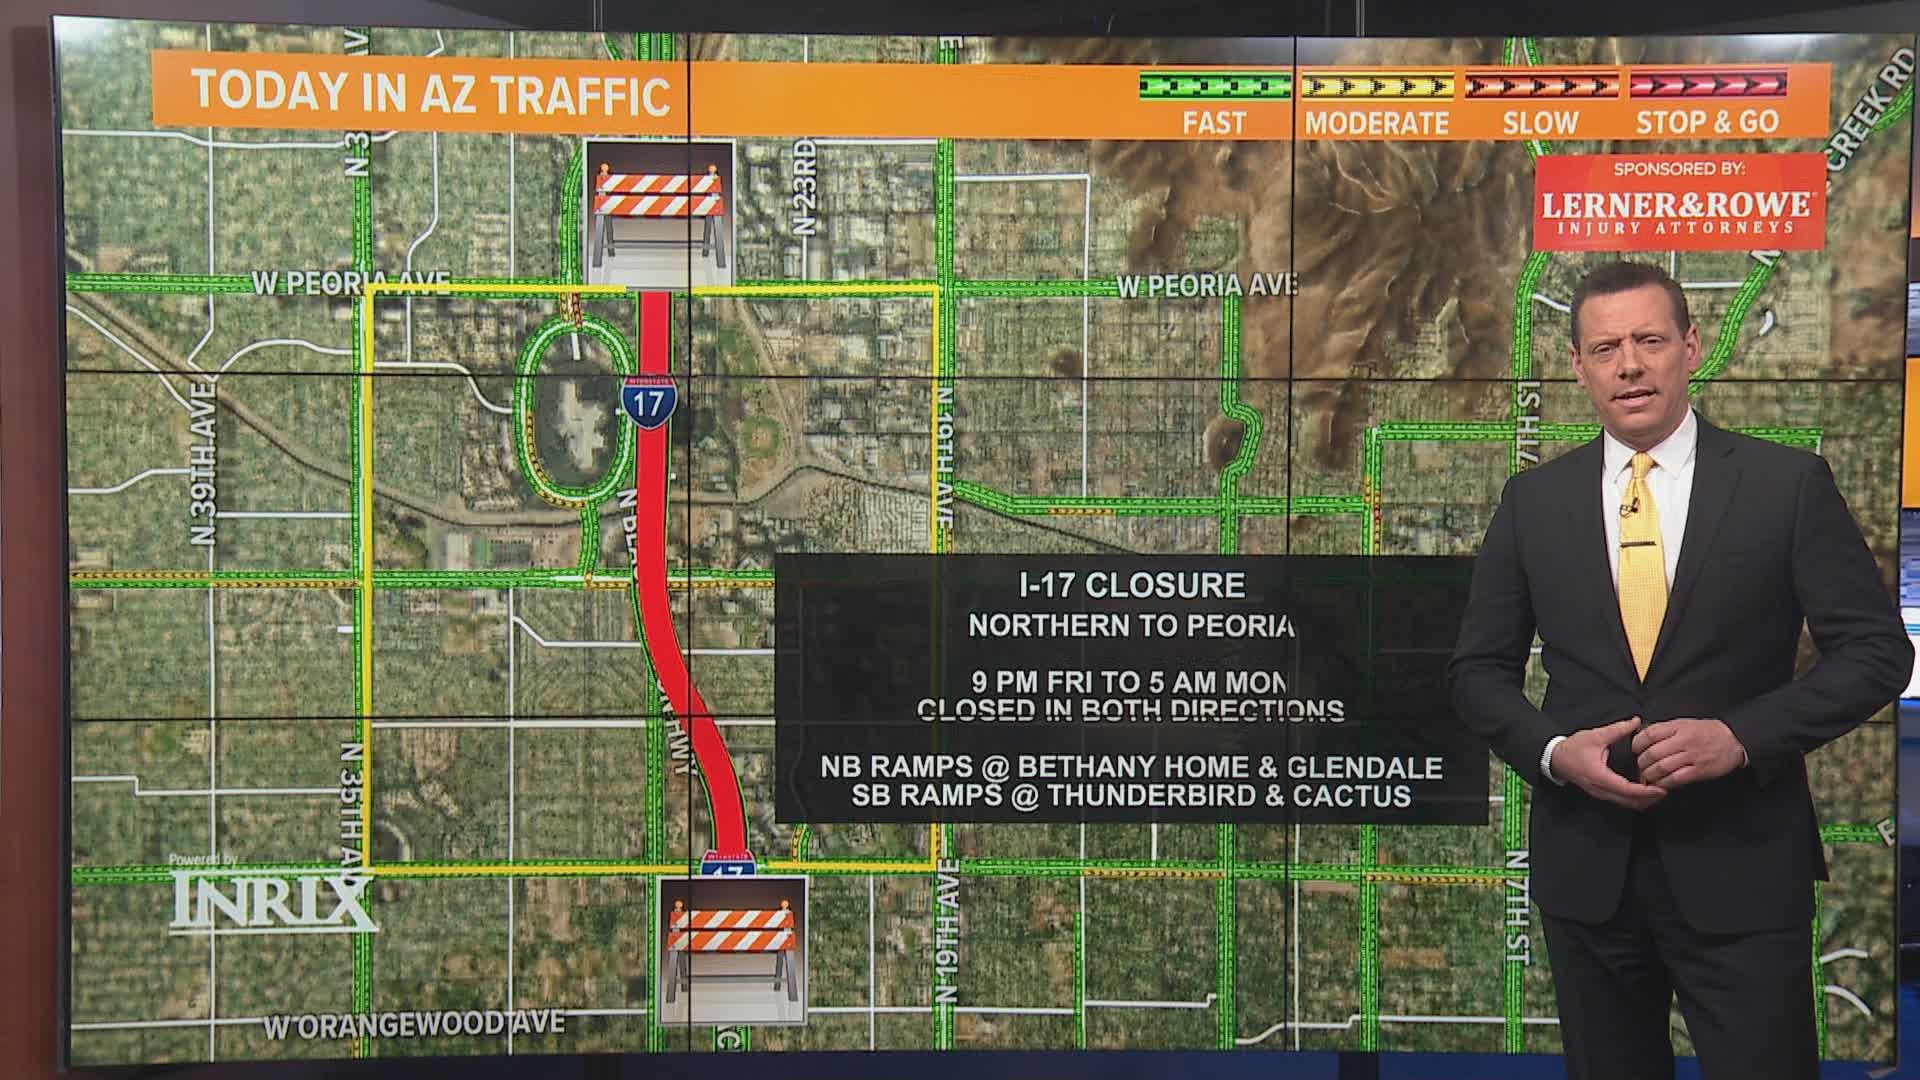 We have a breakdown of all the road closures and detours on Valley roads this weekend.